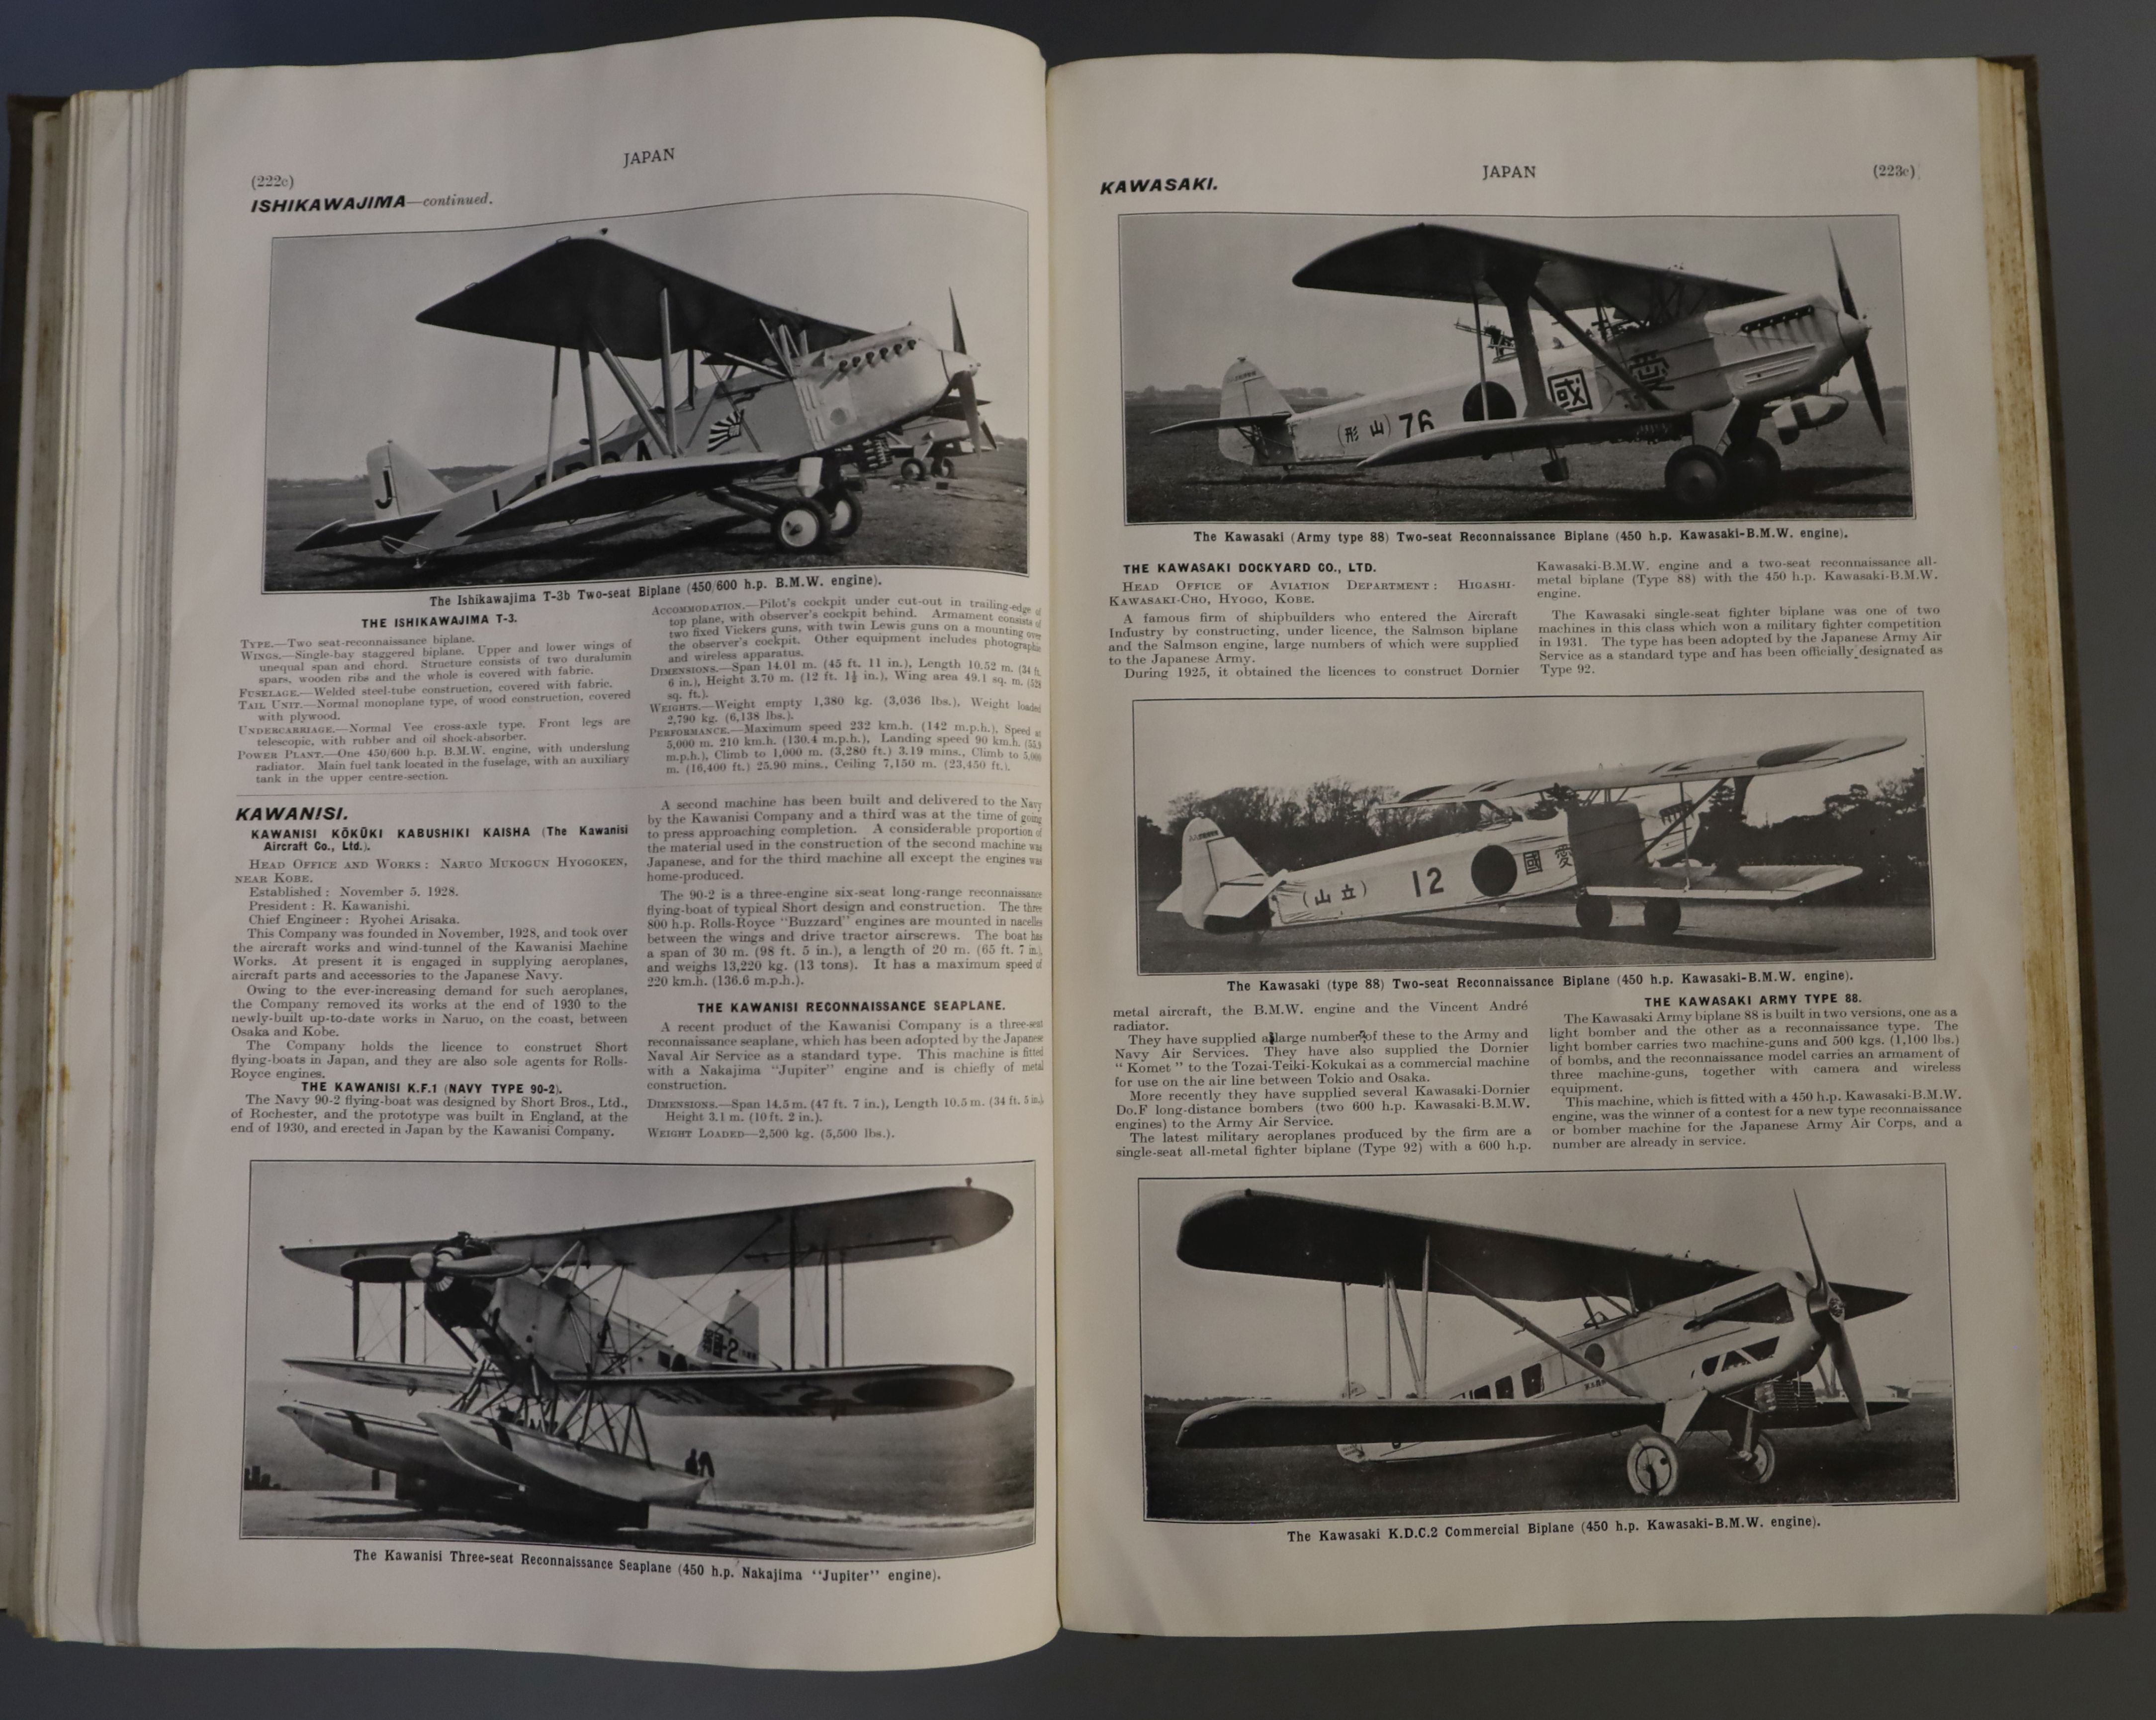 Jane's - Jane's All the World's Aircraft, 5 vols, qto, cloth, London 1925, 1927, 1929, 1931 and - Image 2 of 2